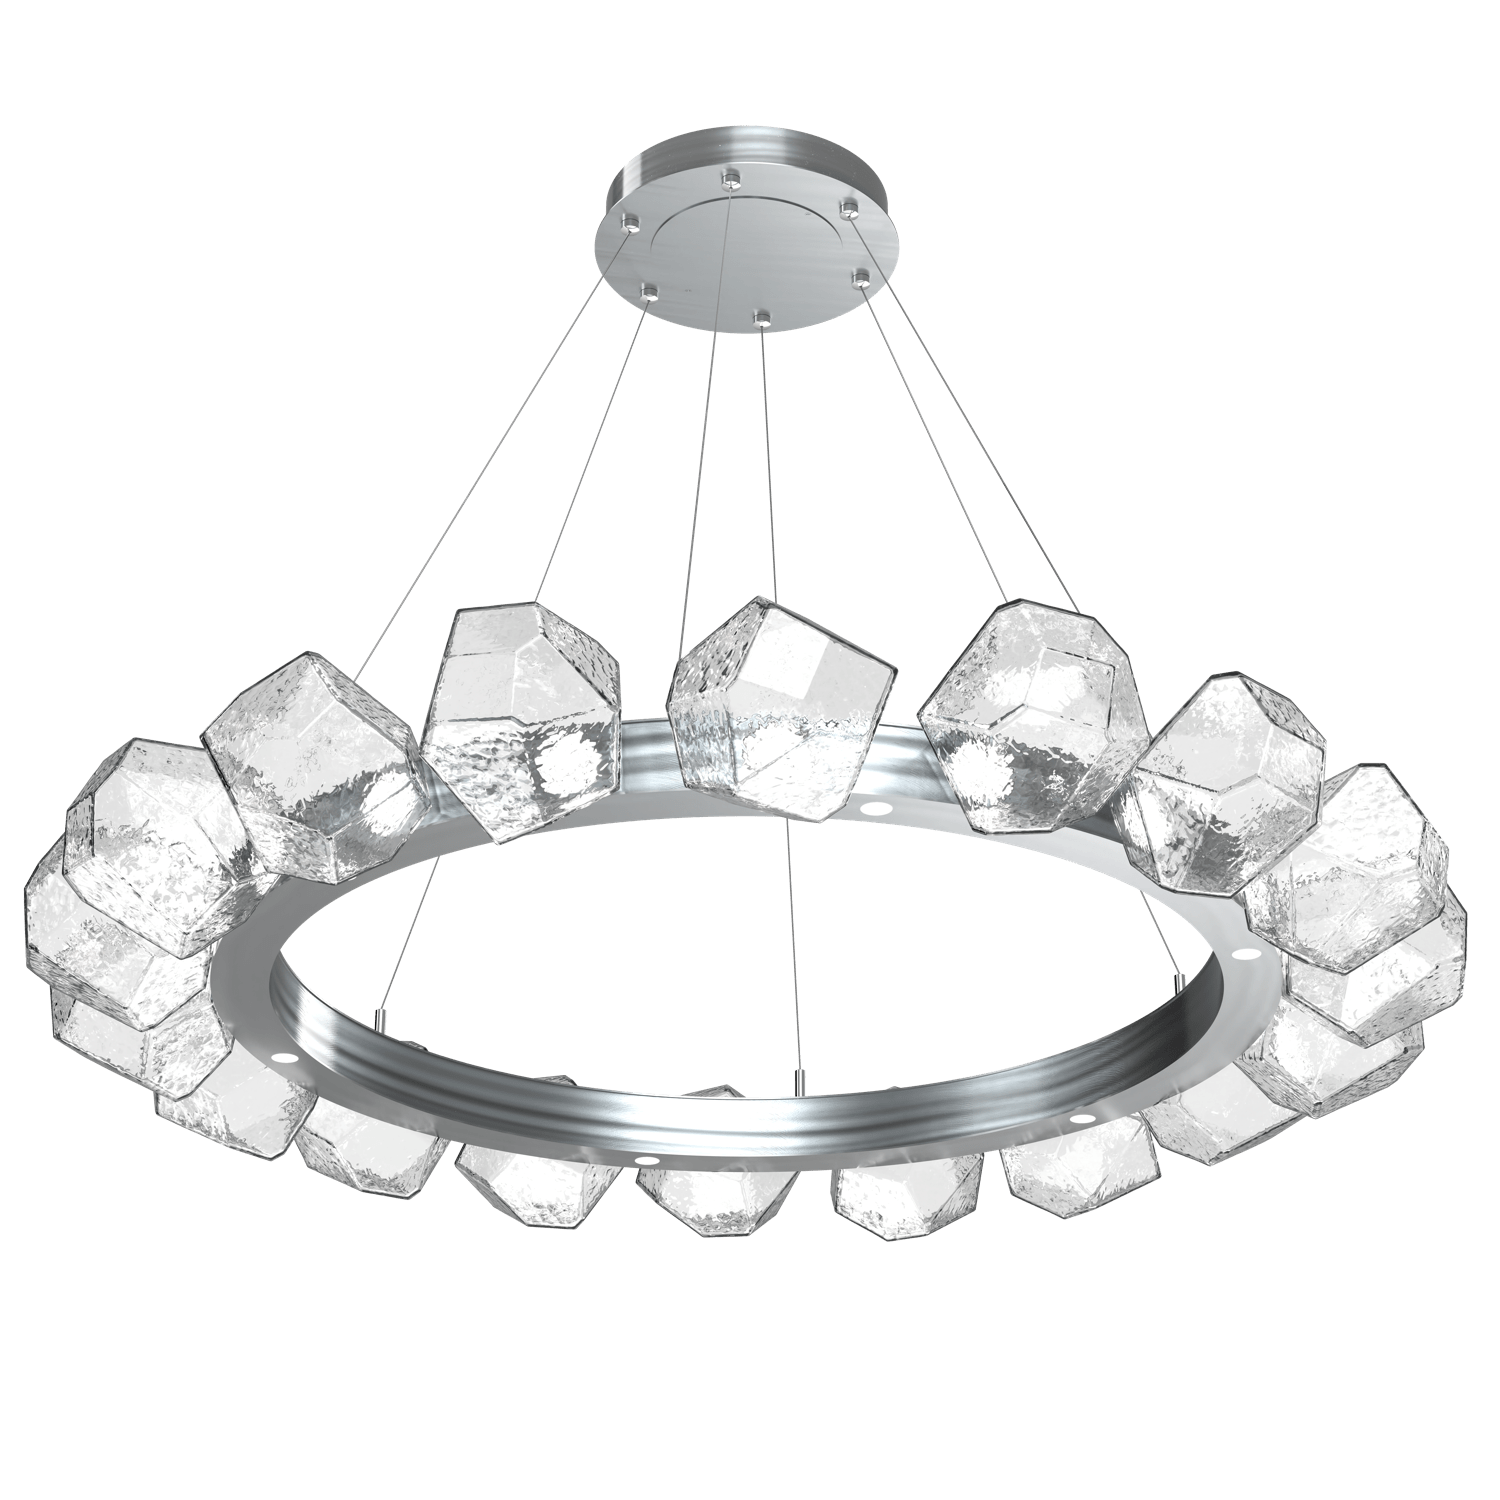 CHB0039-48-SN-C-Hammerton-Studio-Gem-48-inch-radial-ring-chandelier-with-satin-nickel-finish-and-clear-blown-glass-shades-and-LED-lamping